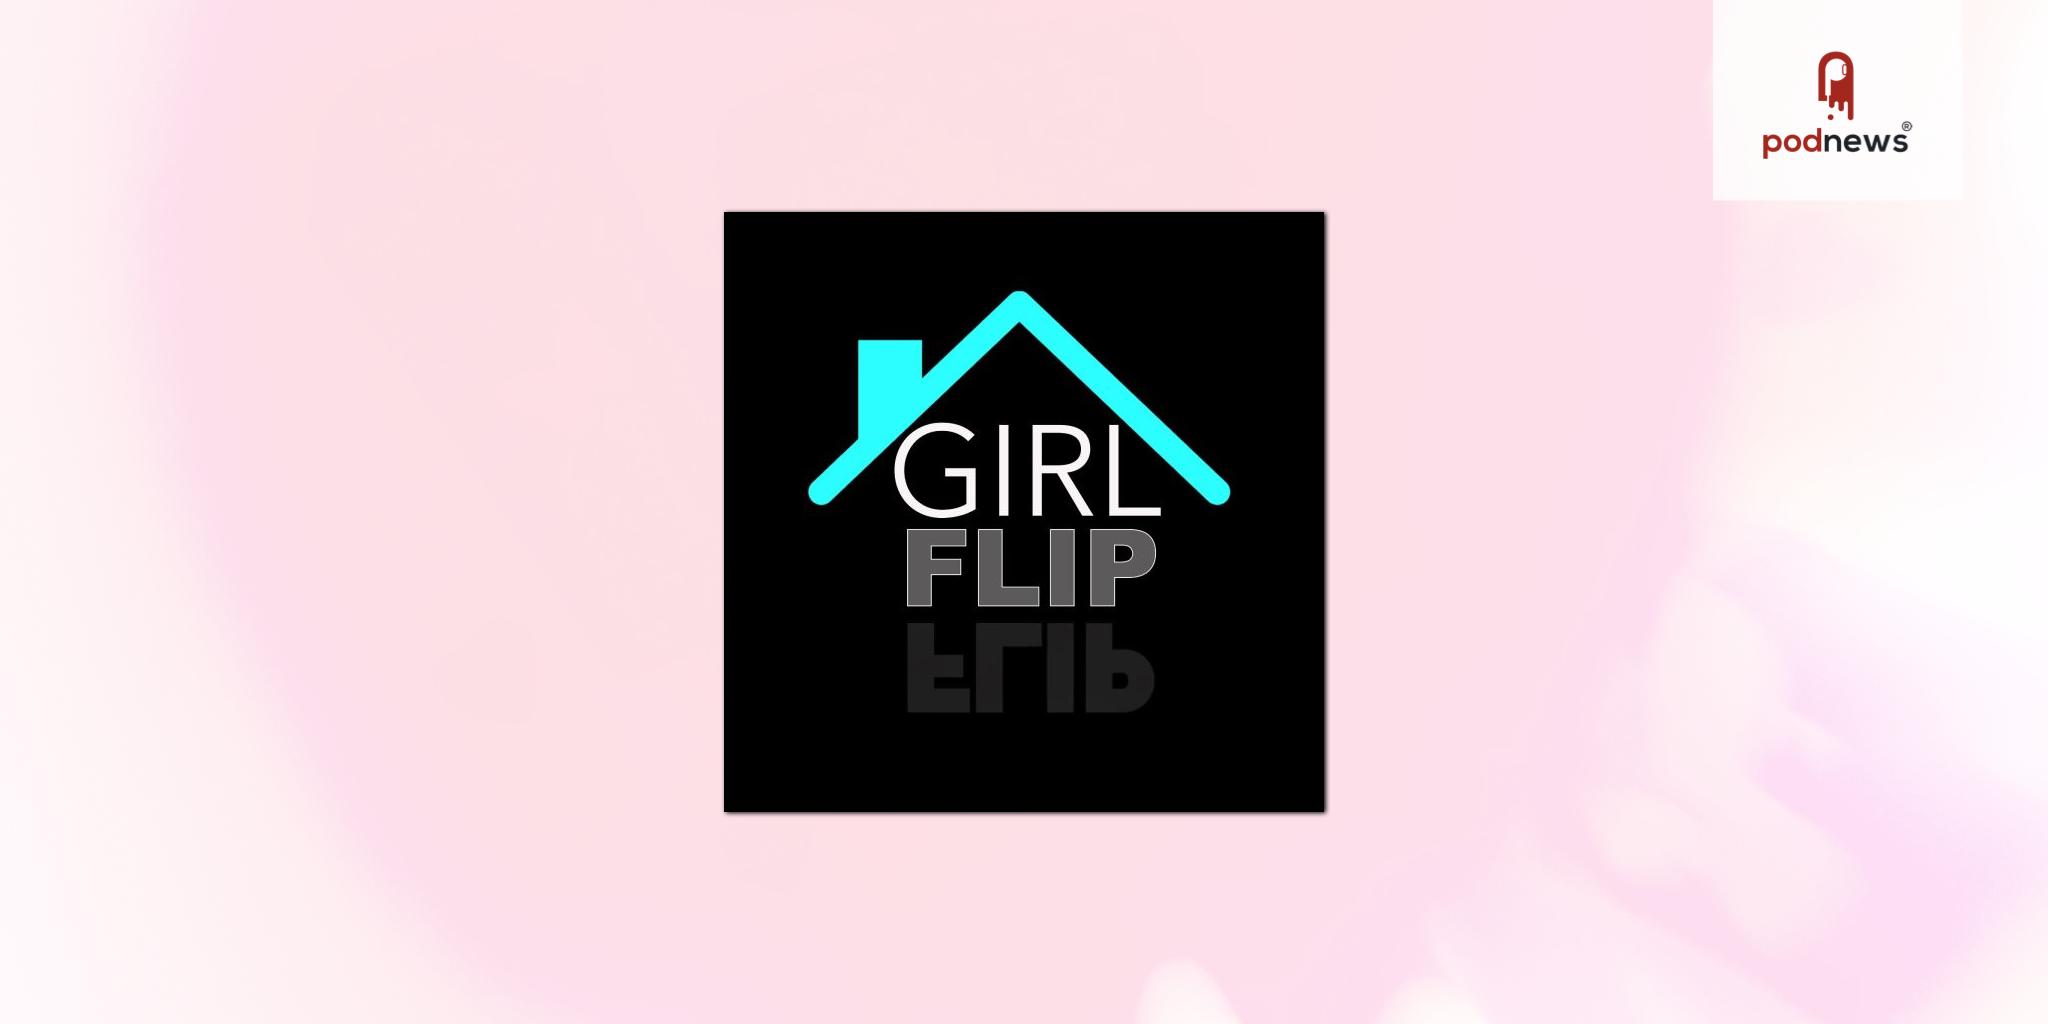 A New Podcast Has Hit The Scene, Girl Flip is Changing The Narrative